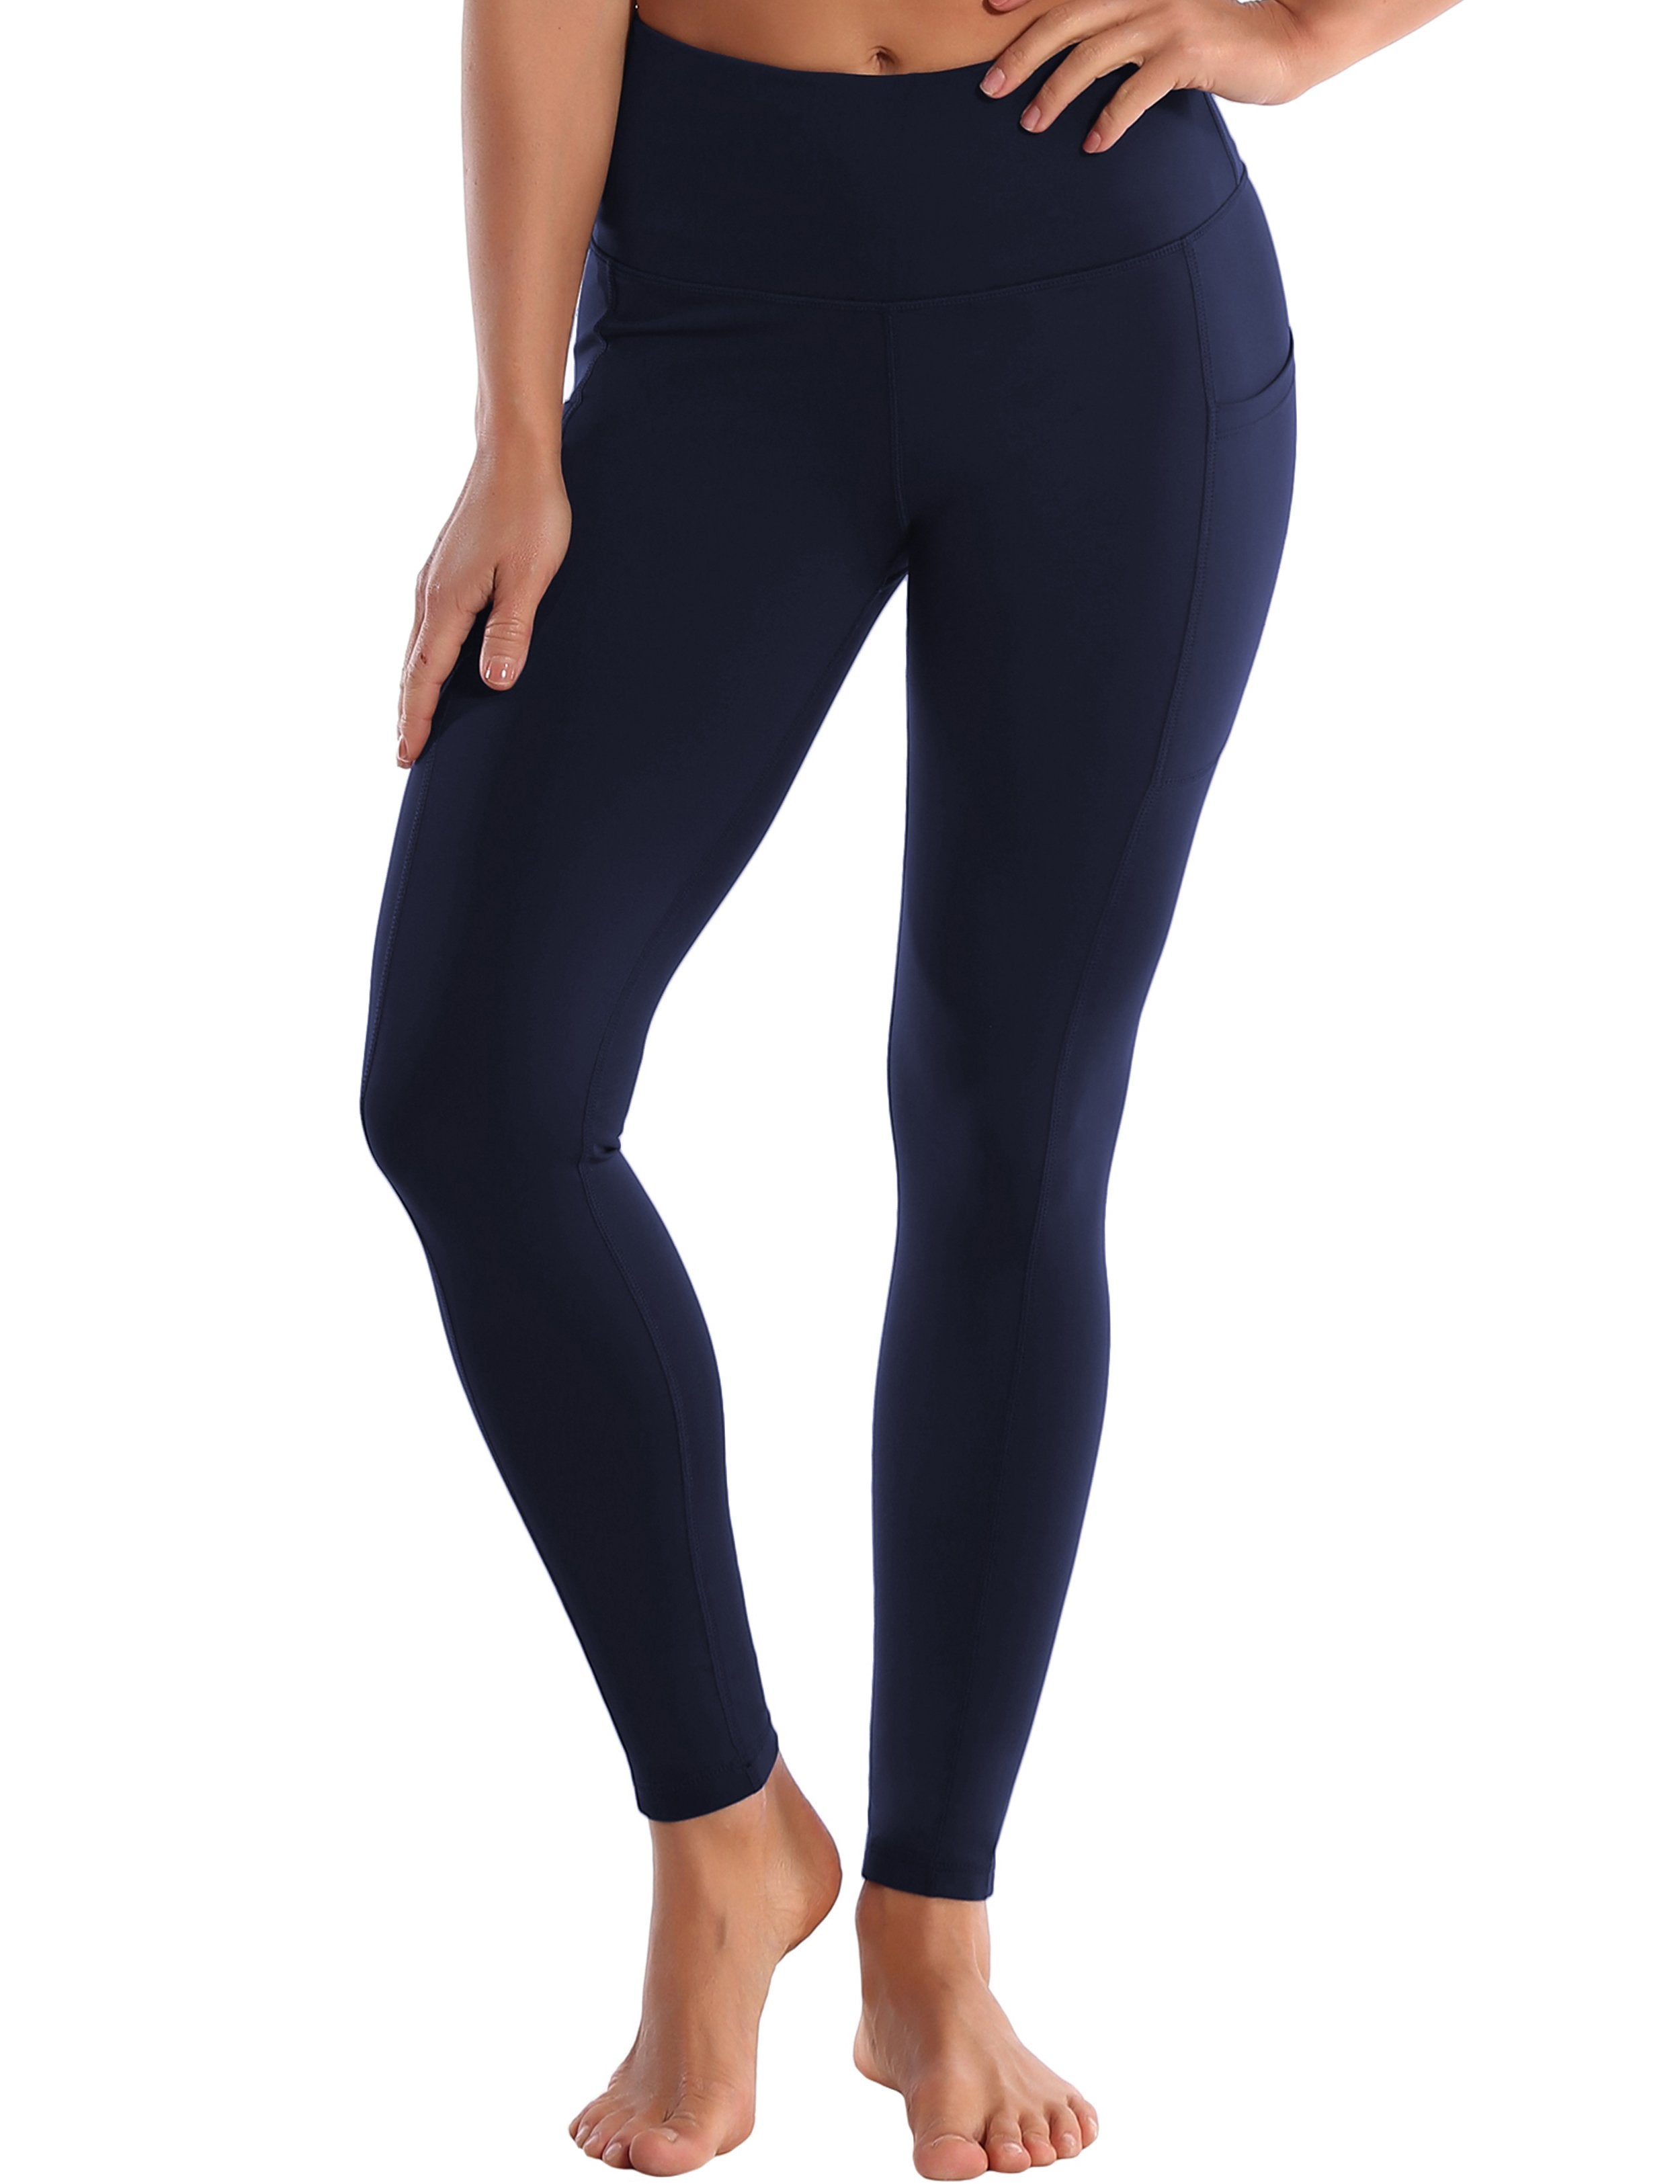 Hip Line Side Pockets Golf Pants darknavy Sexy Hip Line Side Pockets 75%Nylon/25%Spandex Fabric doesn't attract lint easily 4-way stretch No see-through Moisture-wicking Tummy control Inner pocket Two lengths